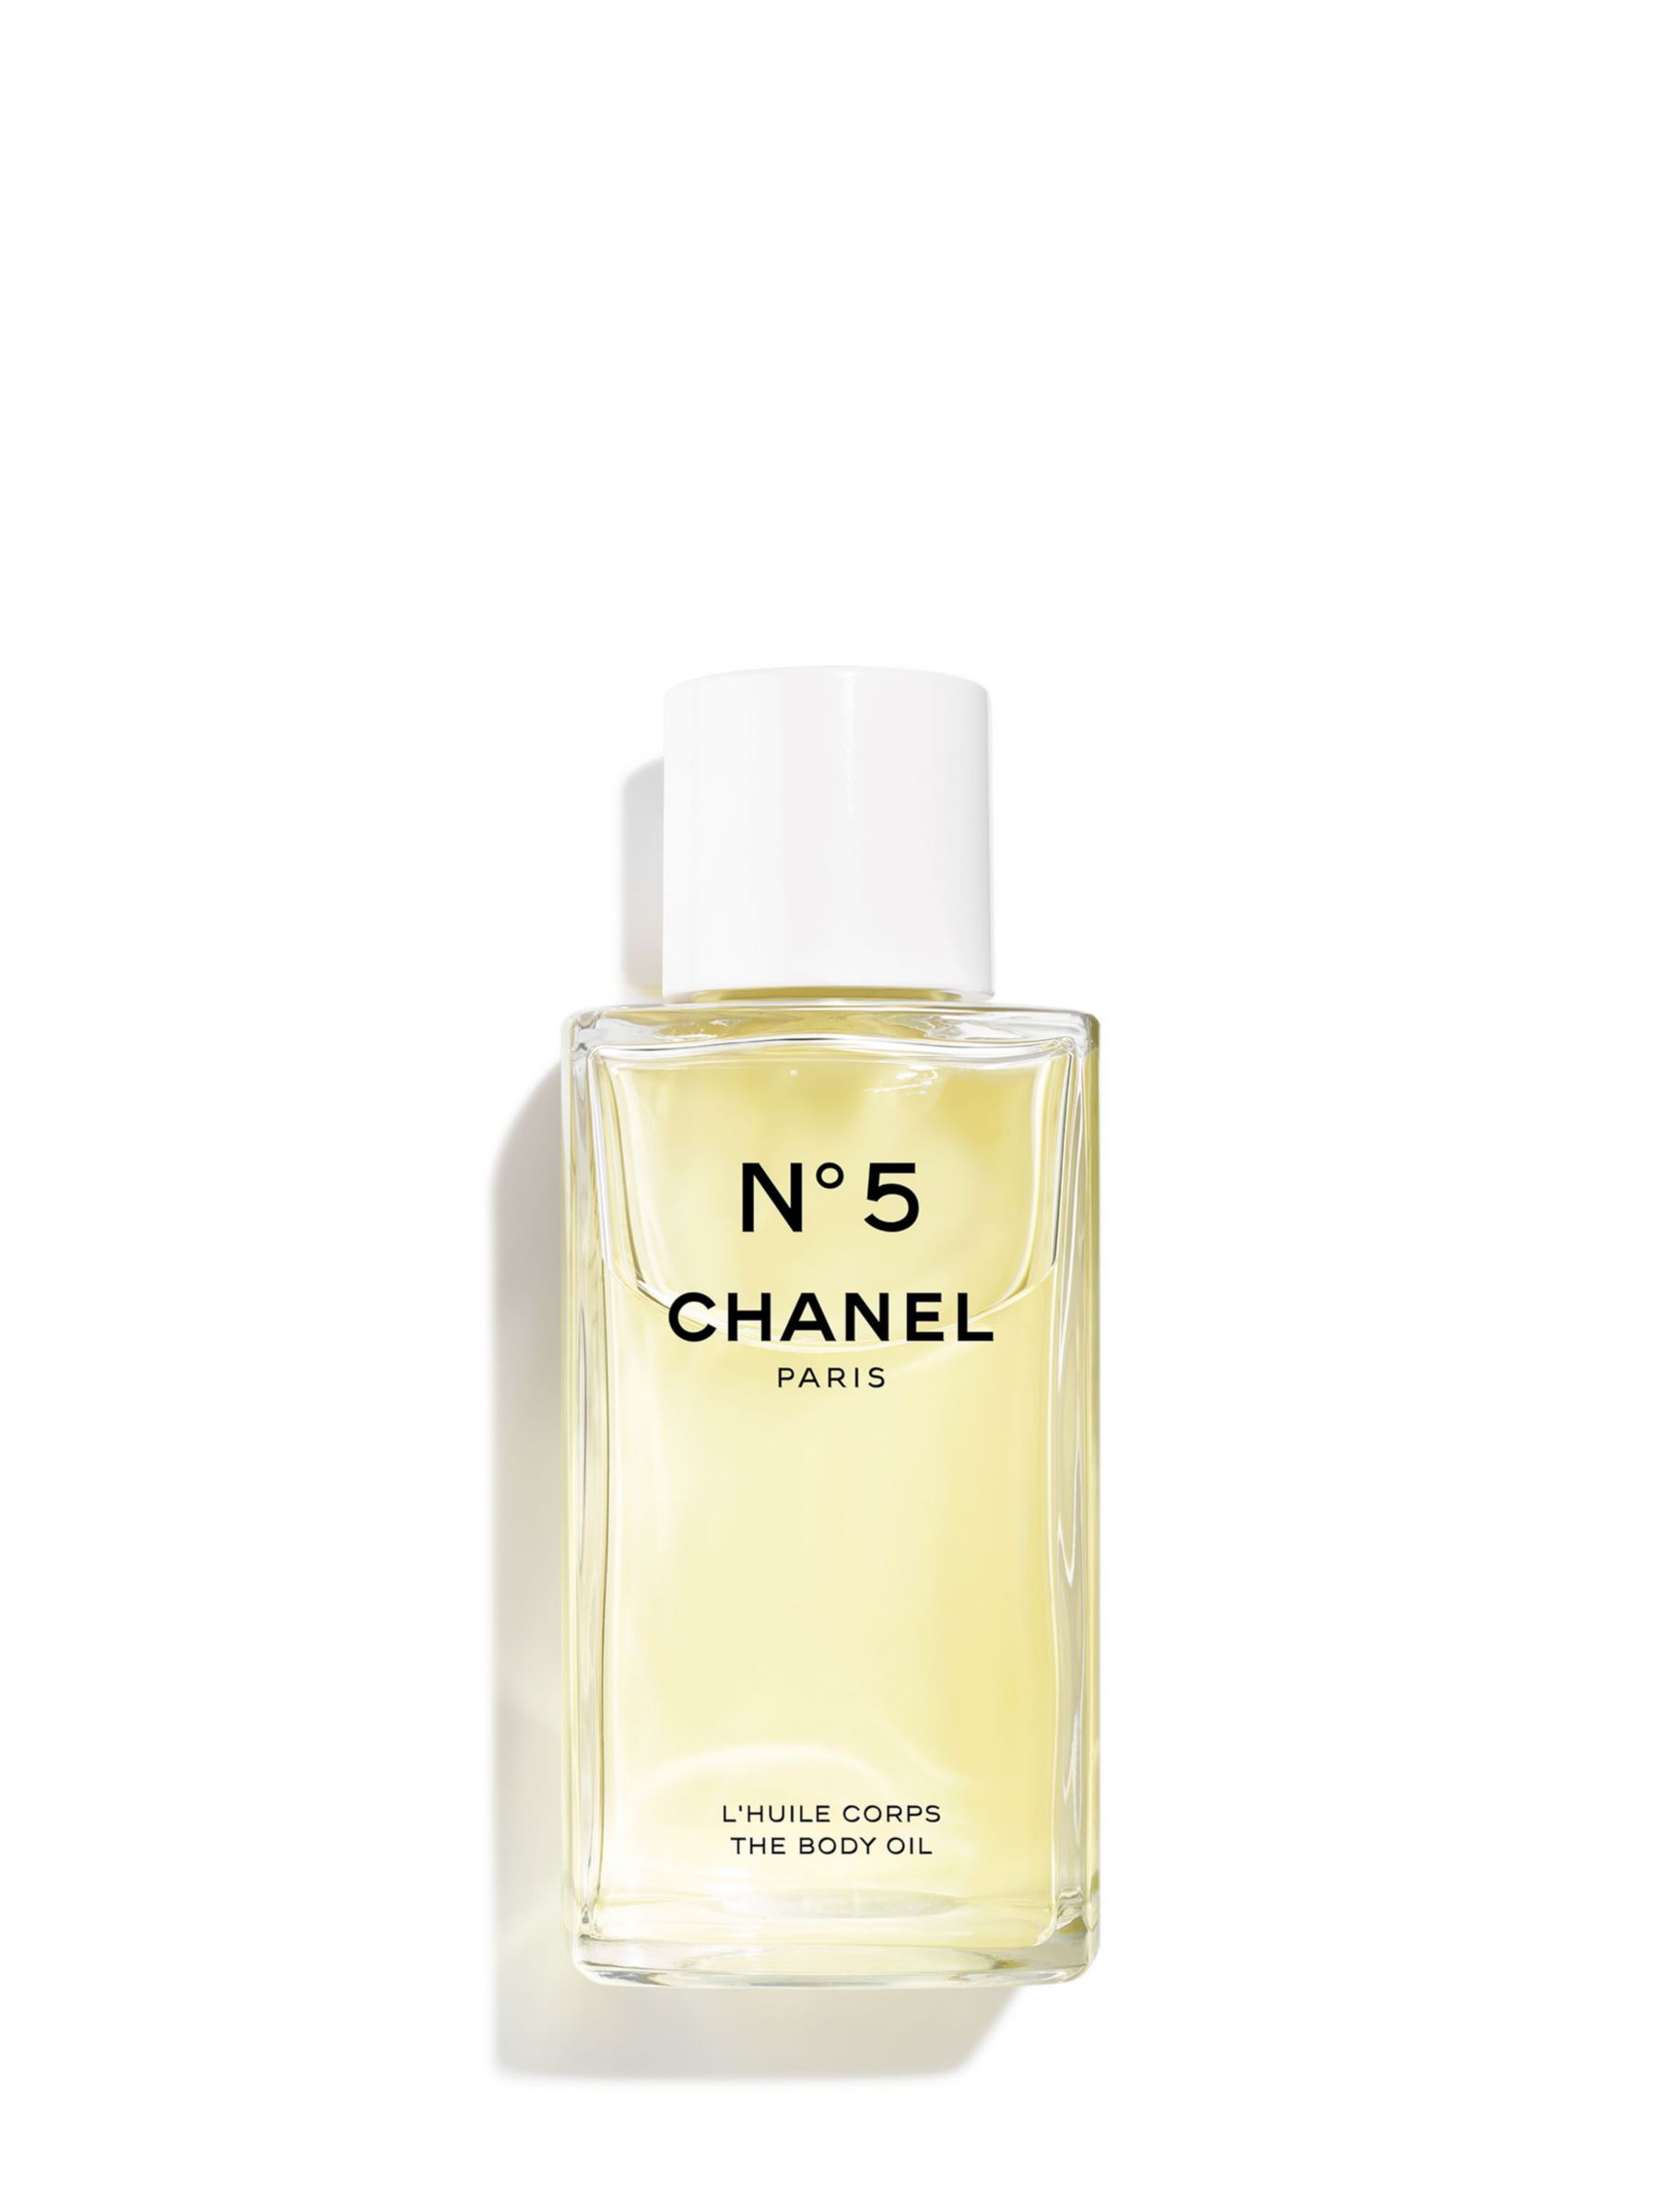 Chanel No 5 Factory The Body Lotion limited edition + Original Order Sheet